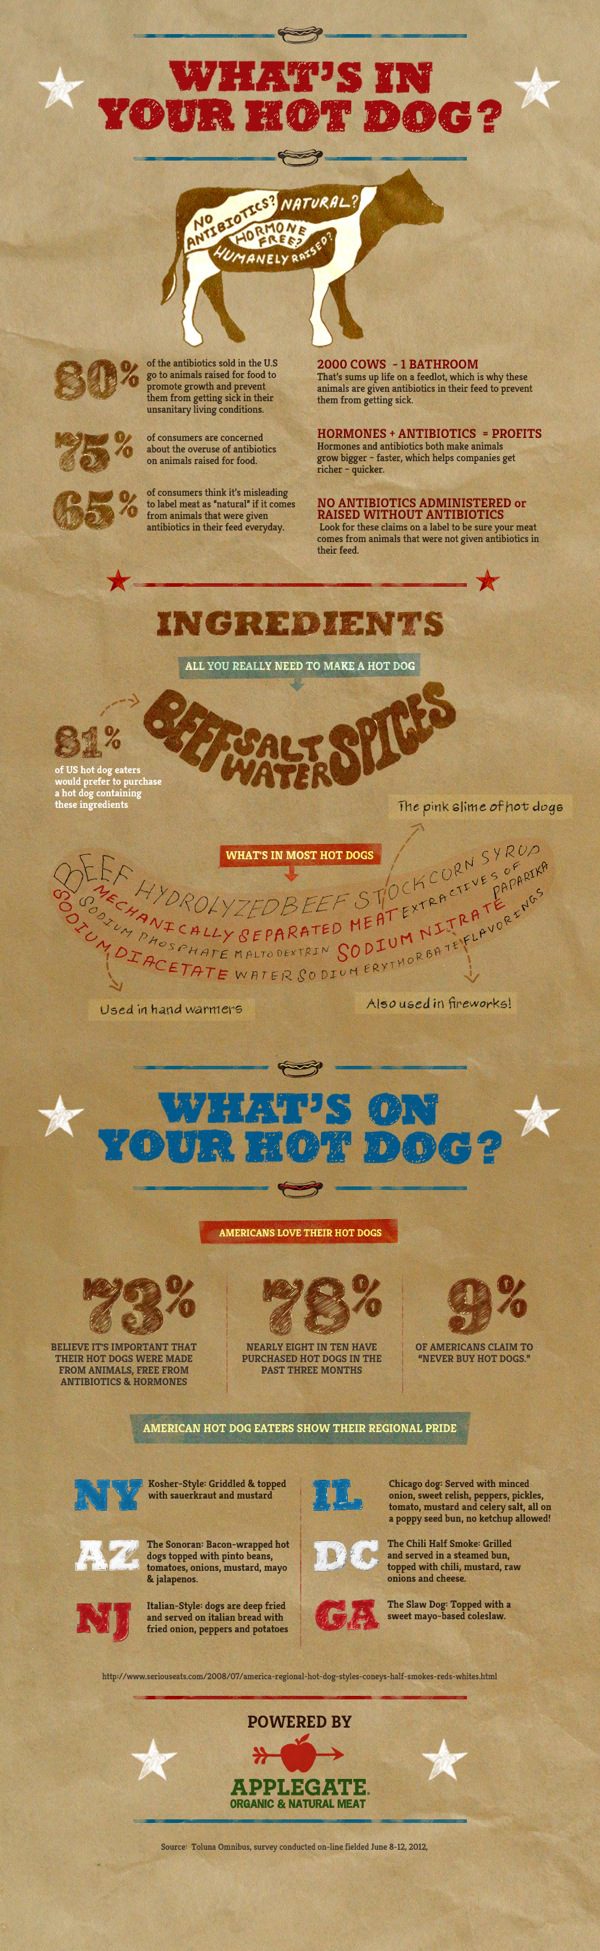 What is Inside Your Hotdogs